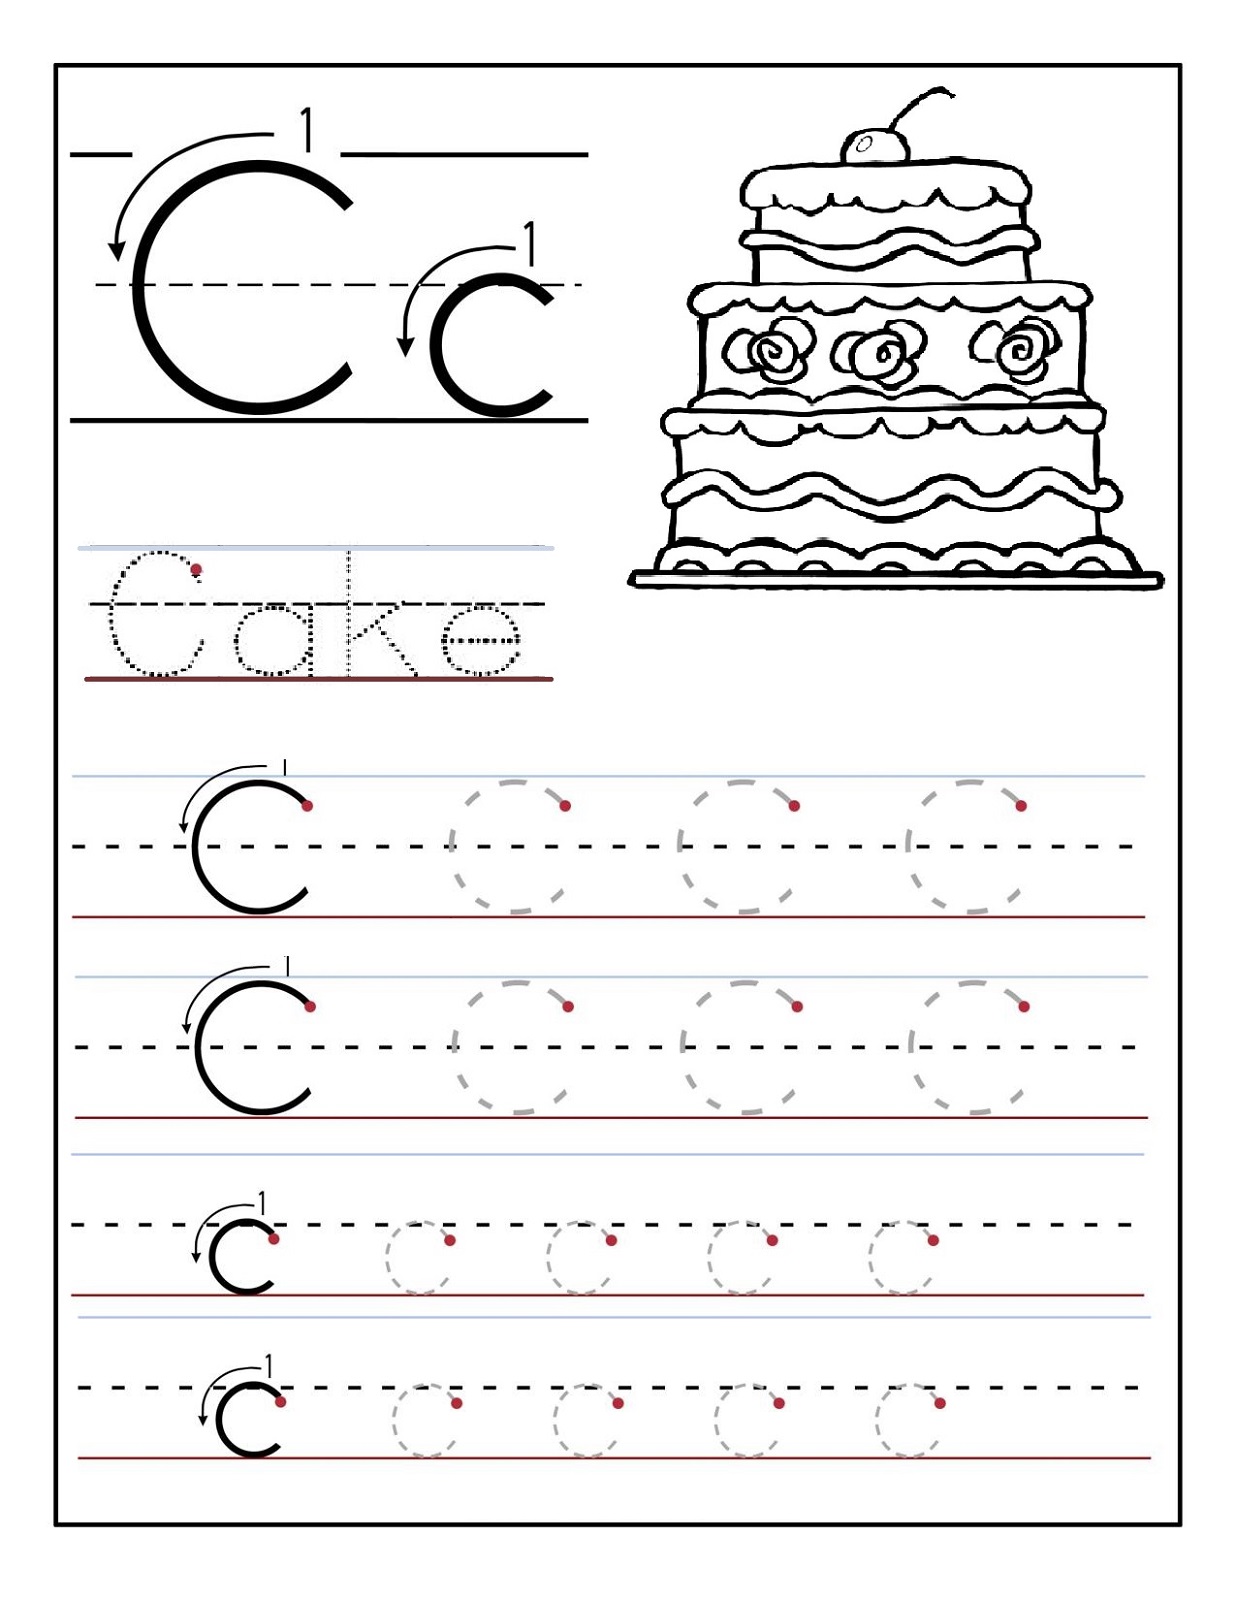 coloring pages alphabet preschool worksheets - photo #35